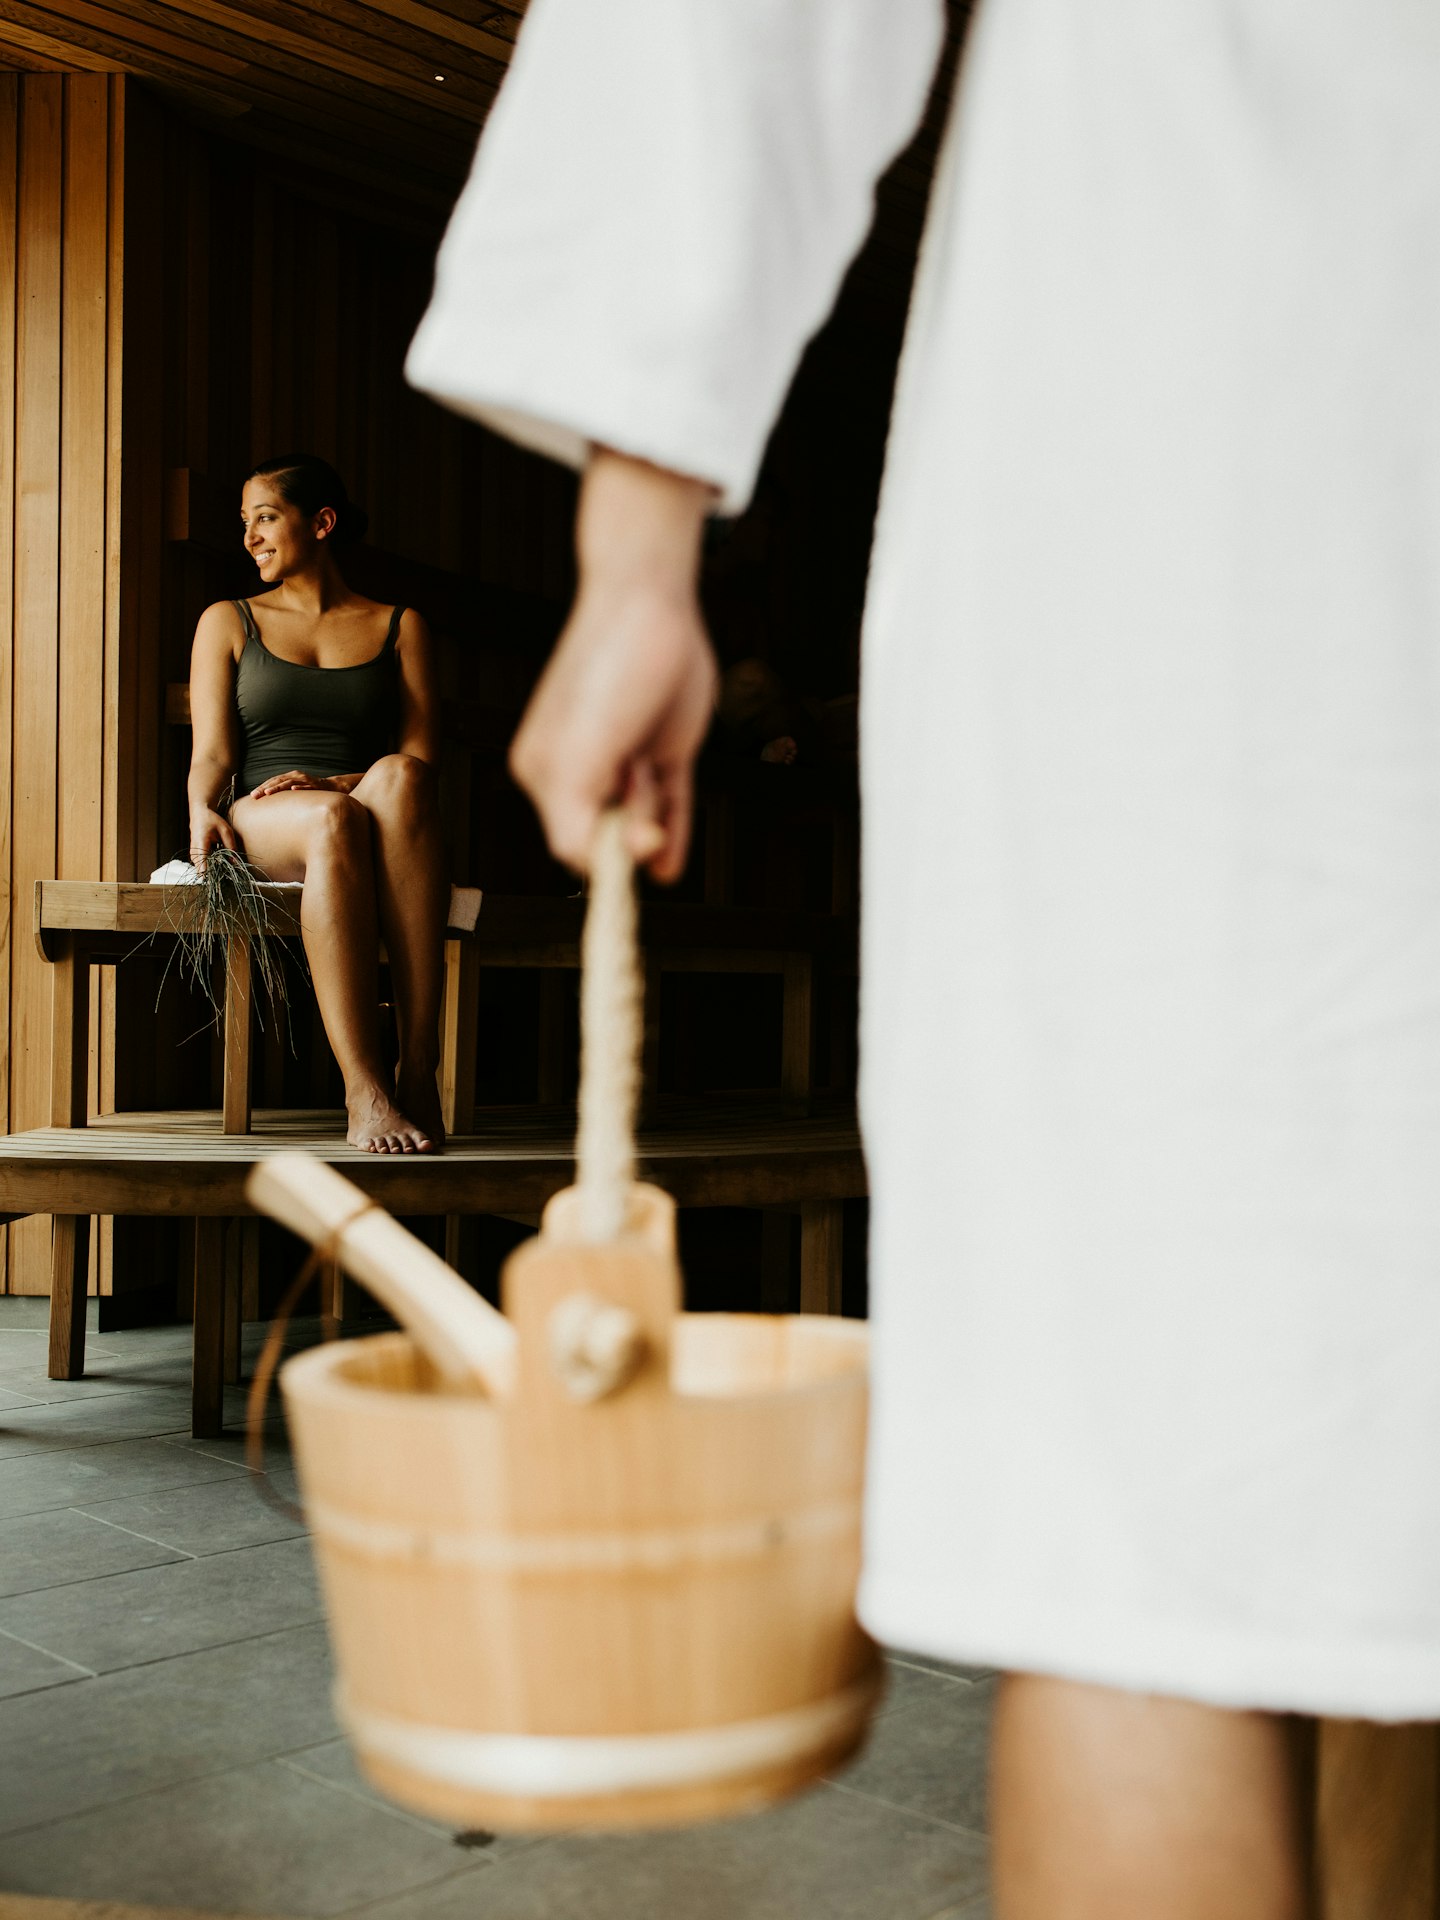 woman sitting in sauna and man in white bath robe in foreground carrying wooden bucket